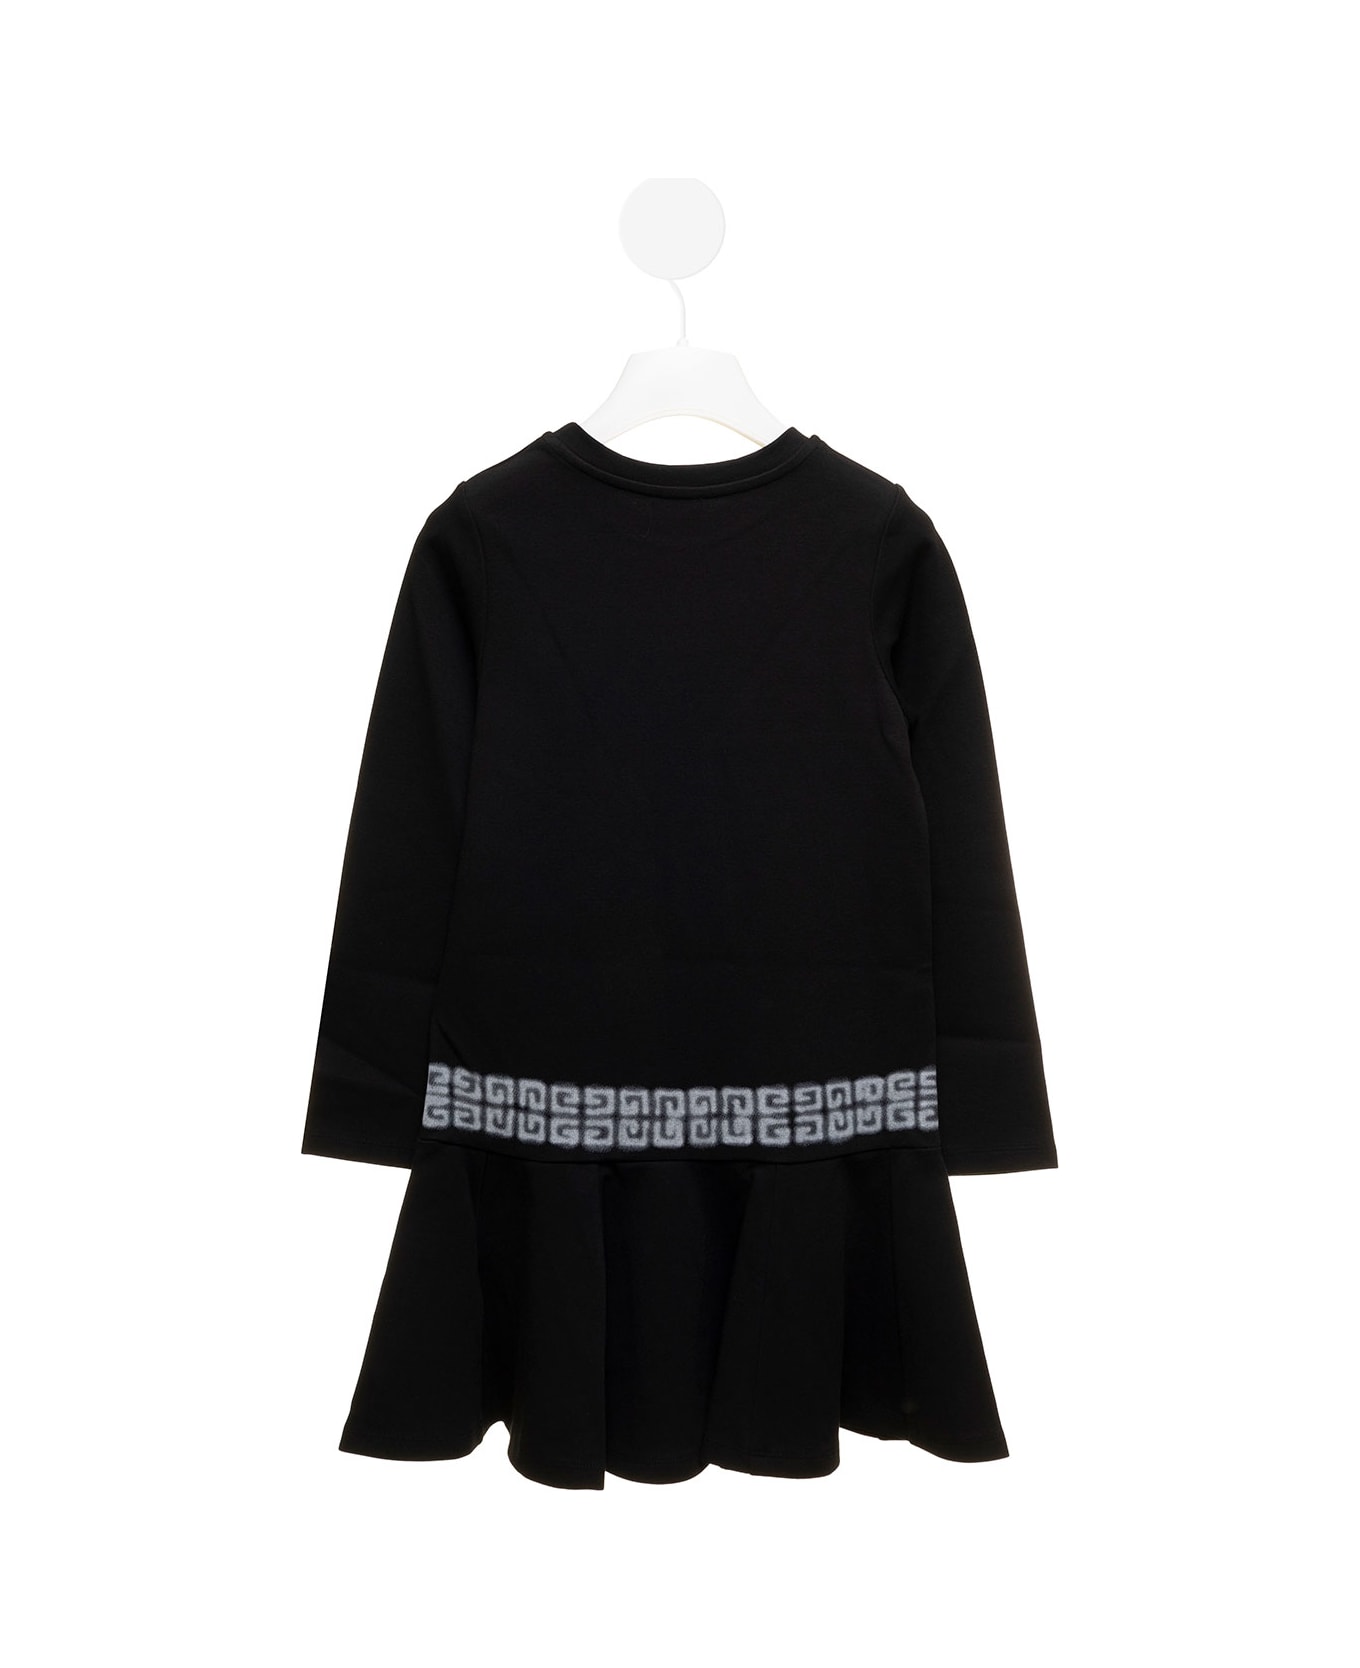 Givenchy Cotton Jersey Dress With Logo And 4g Print Givenchy Kids Girl - Black